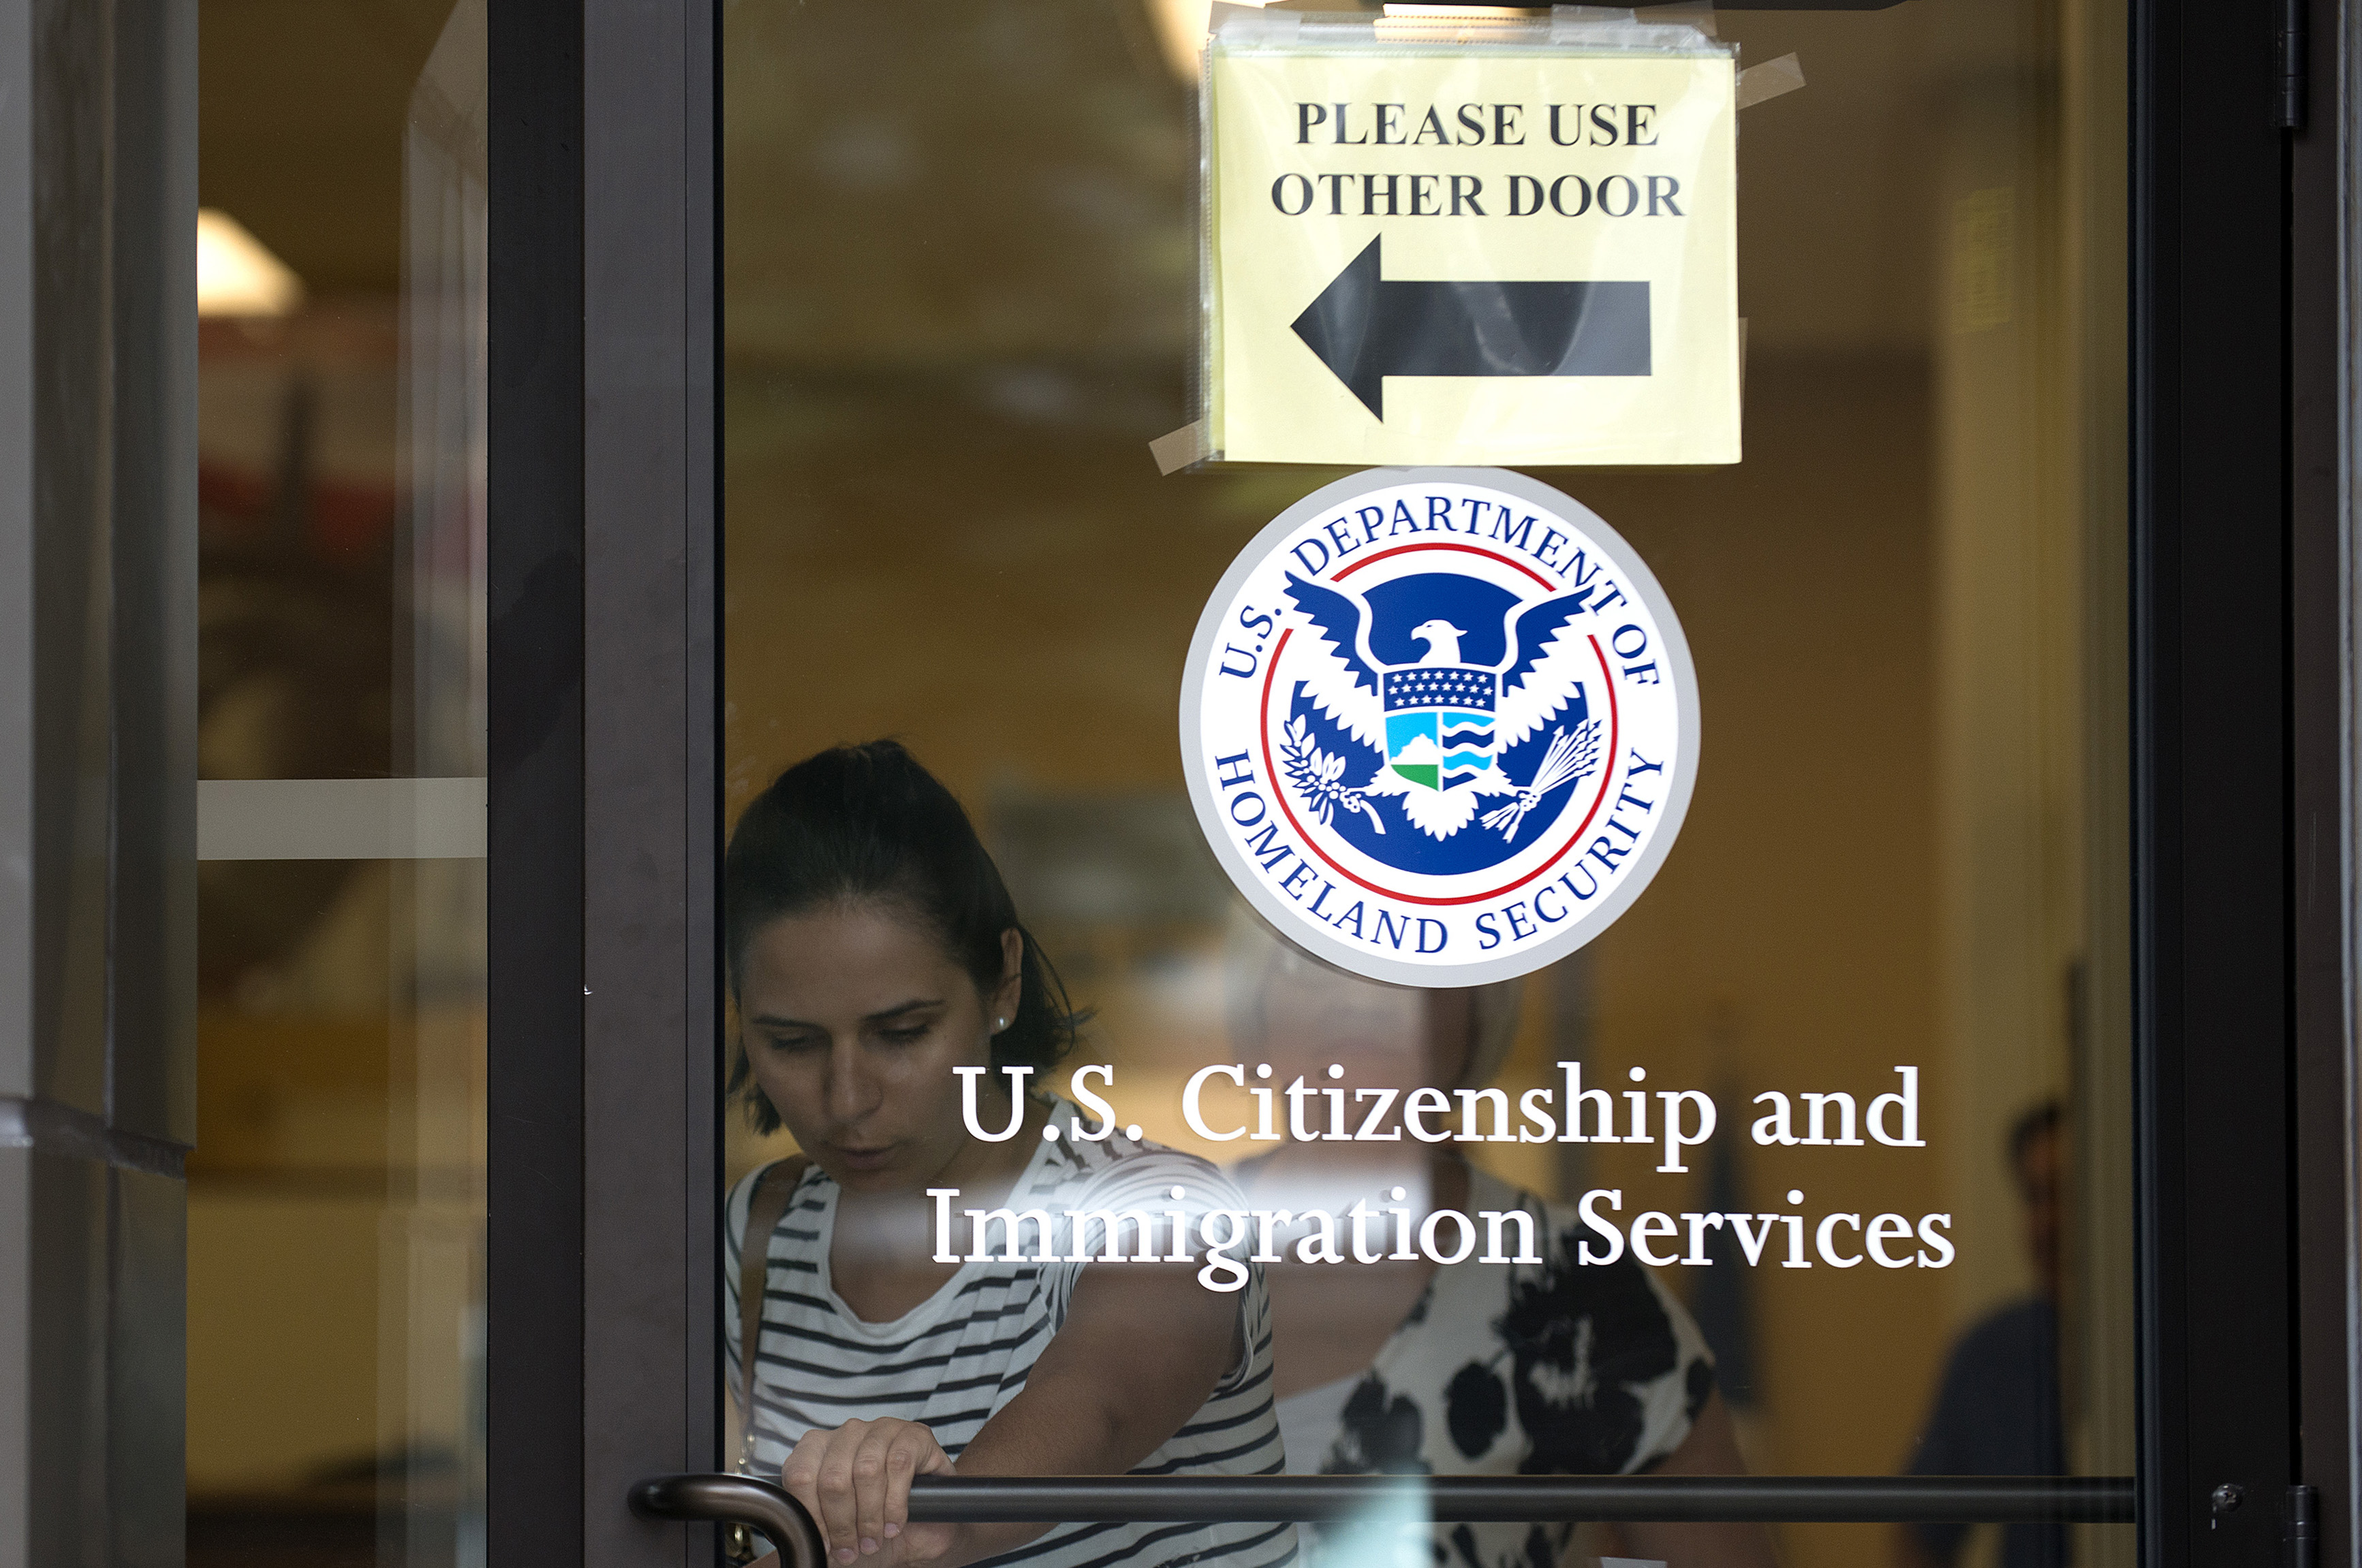 A woman leaves the U.S. Citizenship and Immigration Services offices in New York